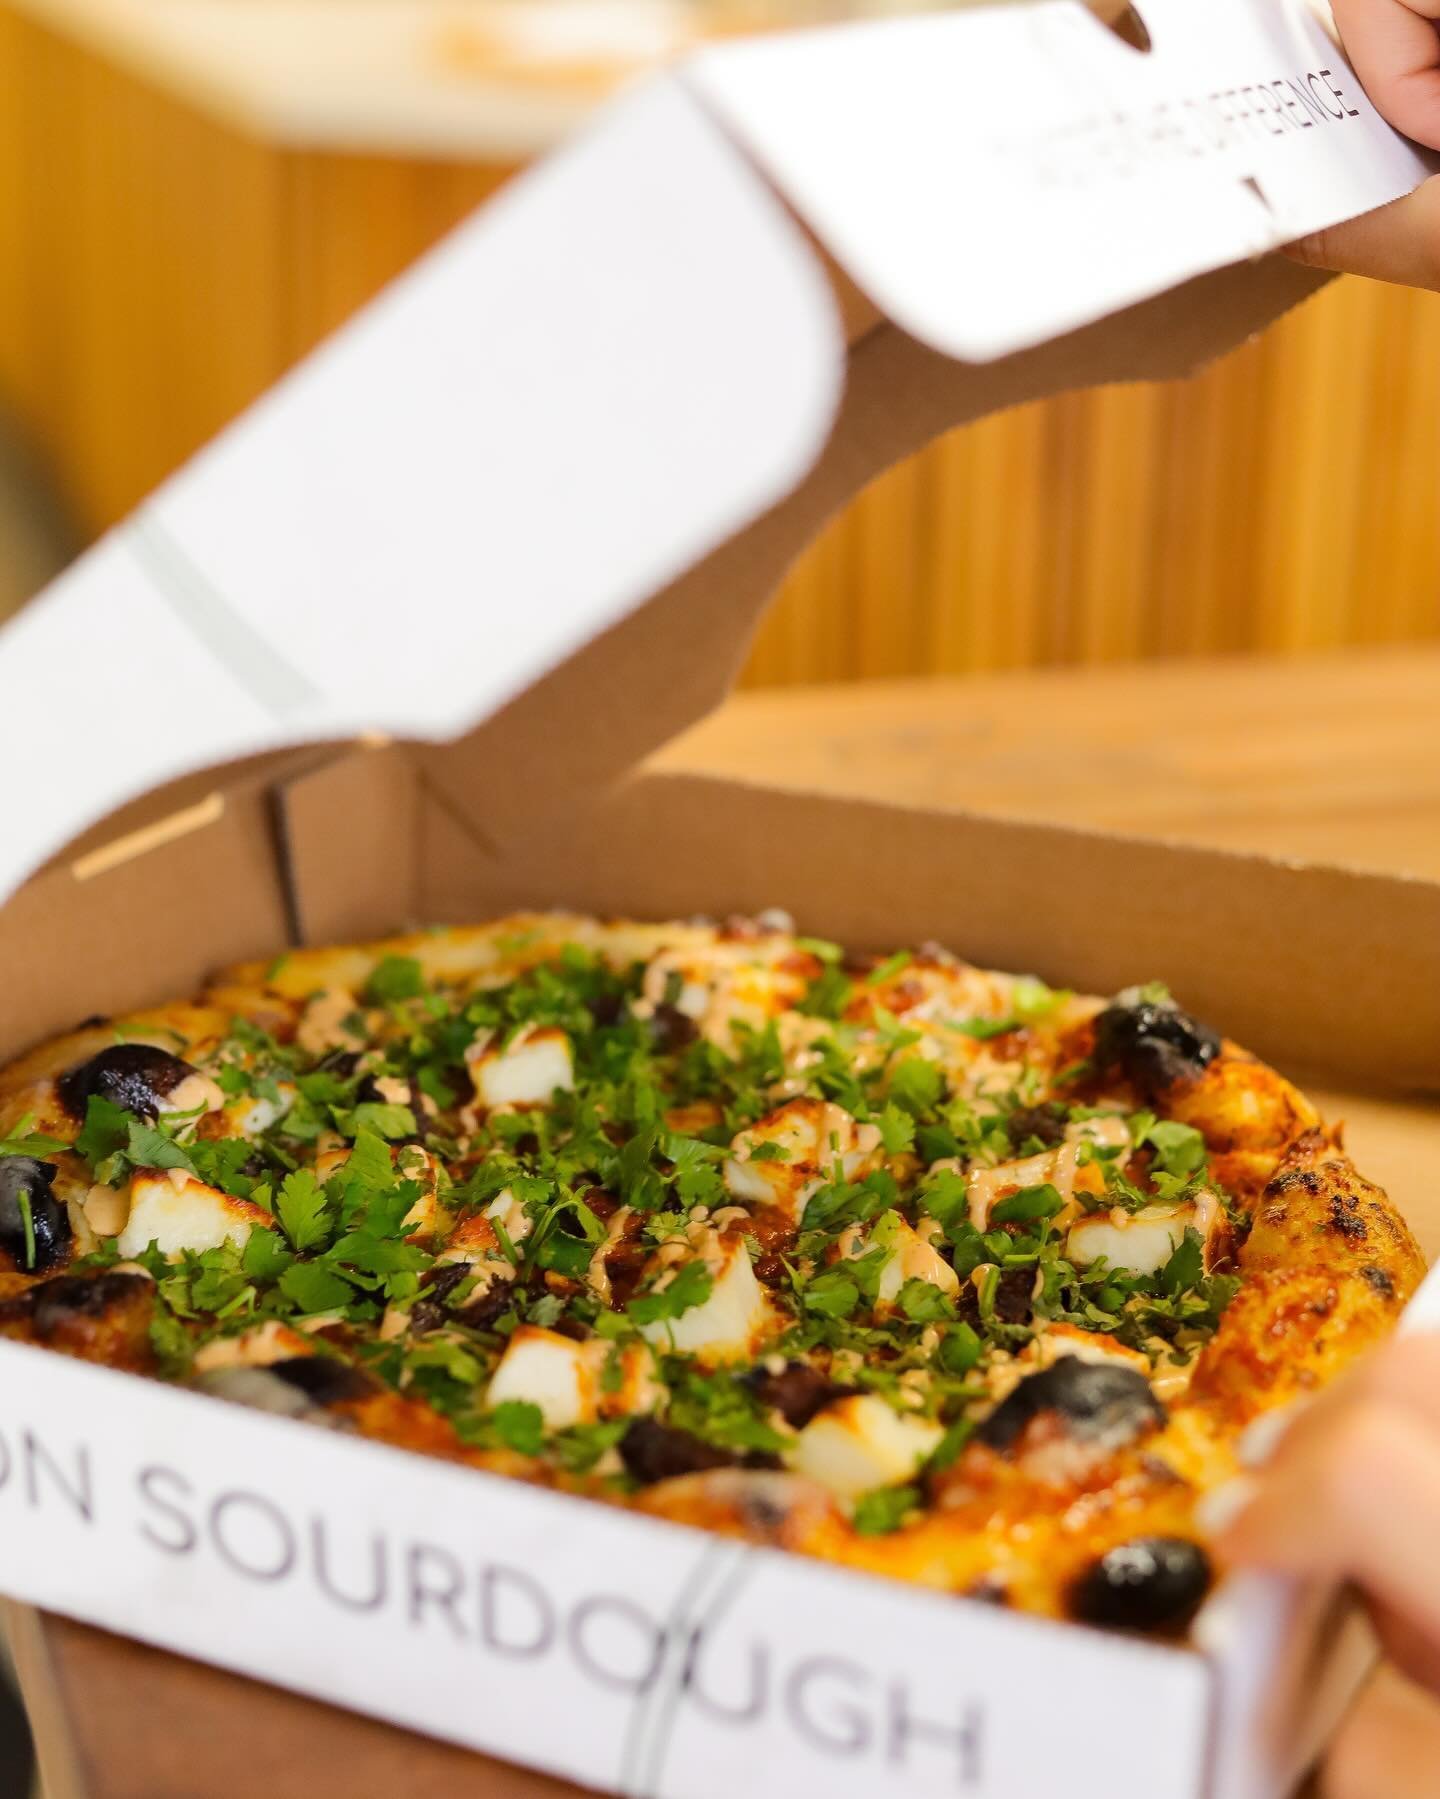 Our Butter Paneer pizza? It&rsquo;s simply irresistible &ndash;  creamy, cheesy, and full of Indian-inspired goodness, all on a crispy garlic &lsquo;naan&rsquo; crust 🤤

The perfect pick-me-up for those midweek blues 😉

#sourdoughpizza #burnabyeats